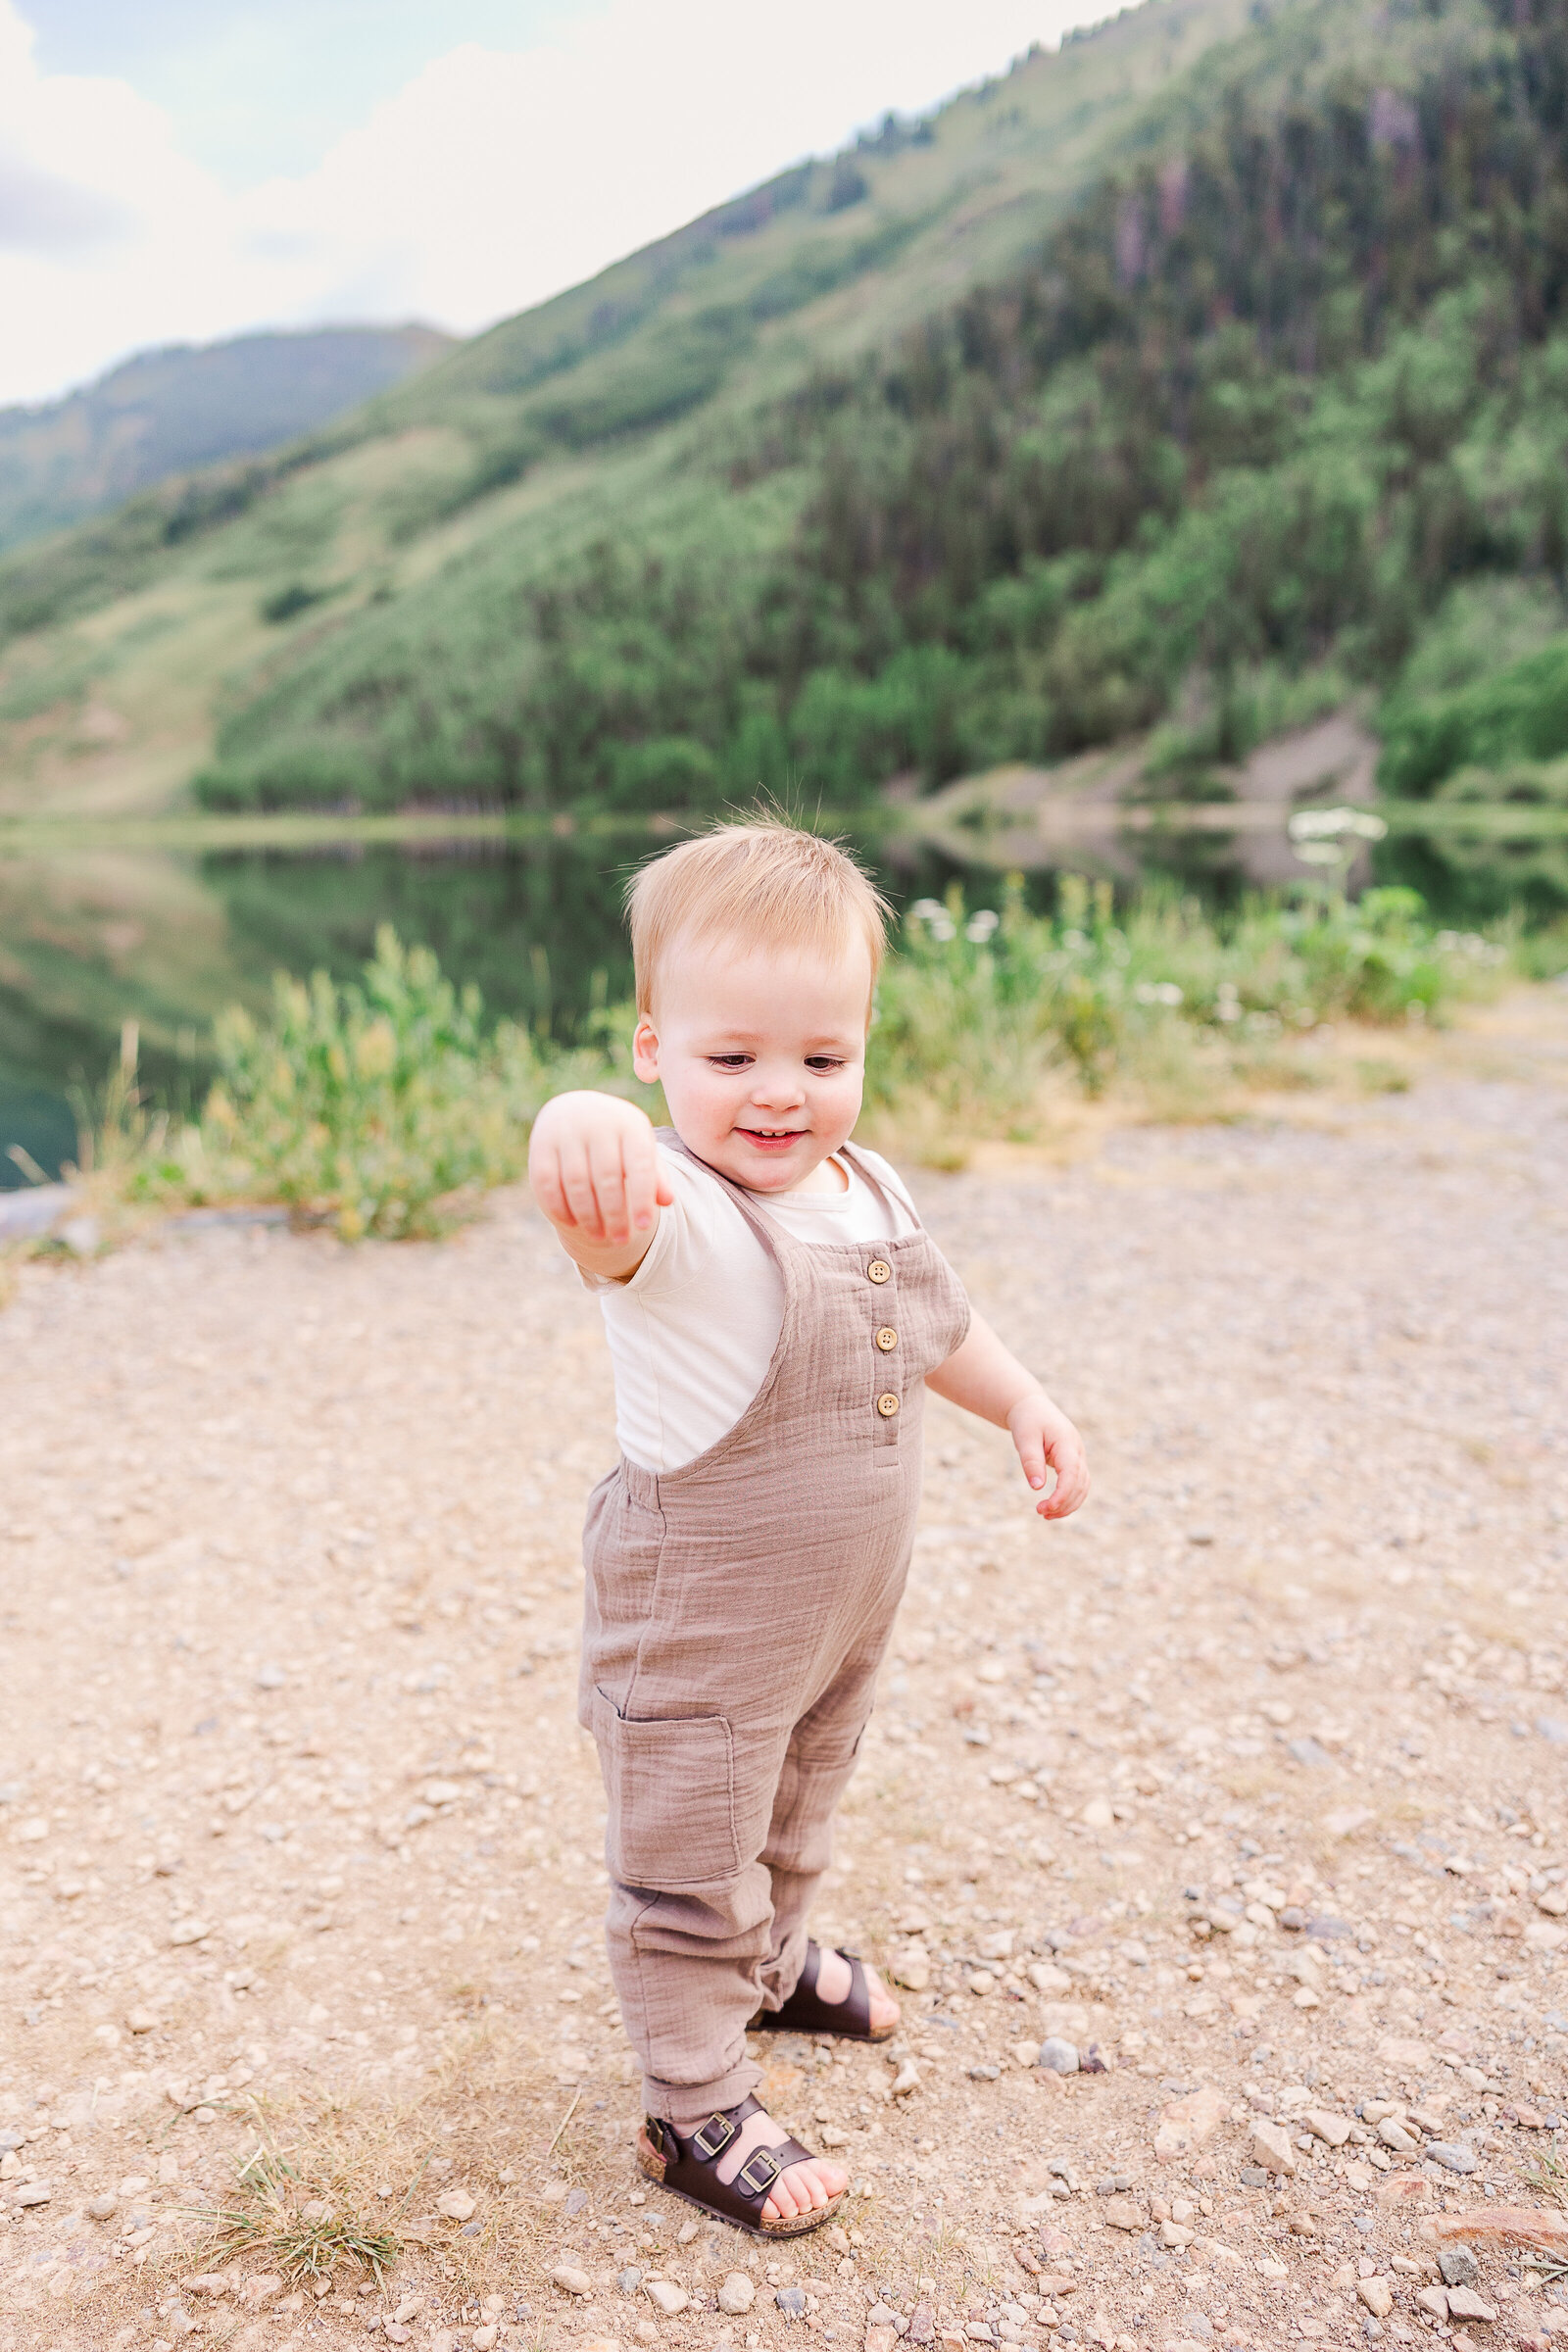 one year old throws rock and giggles